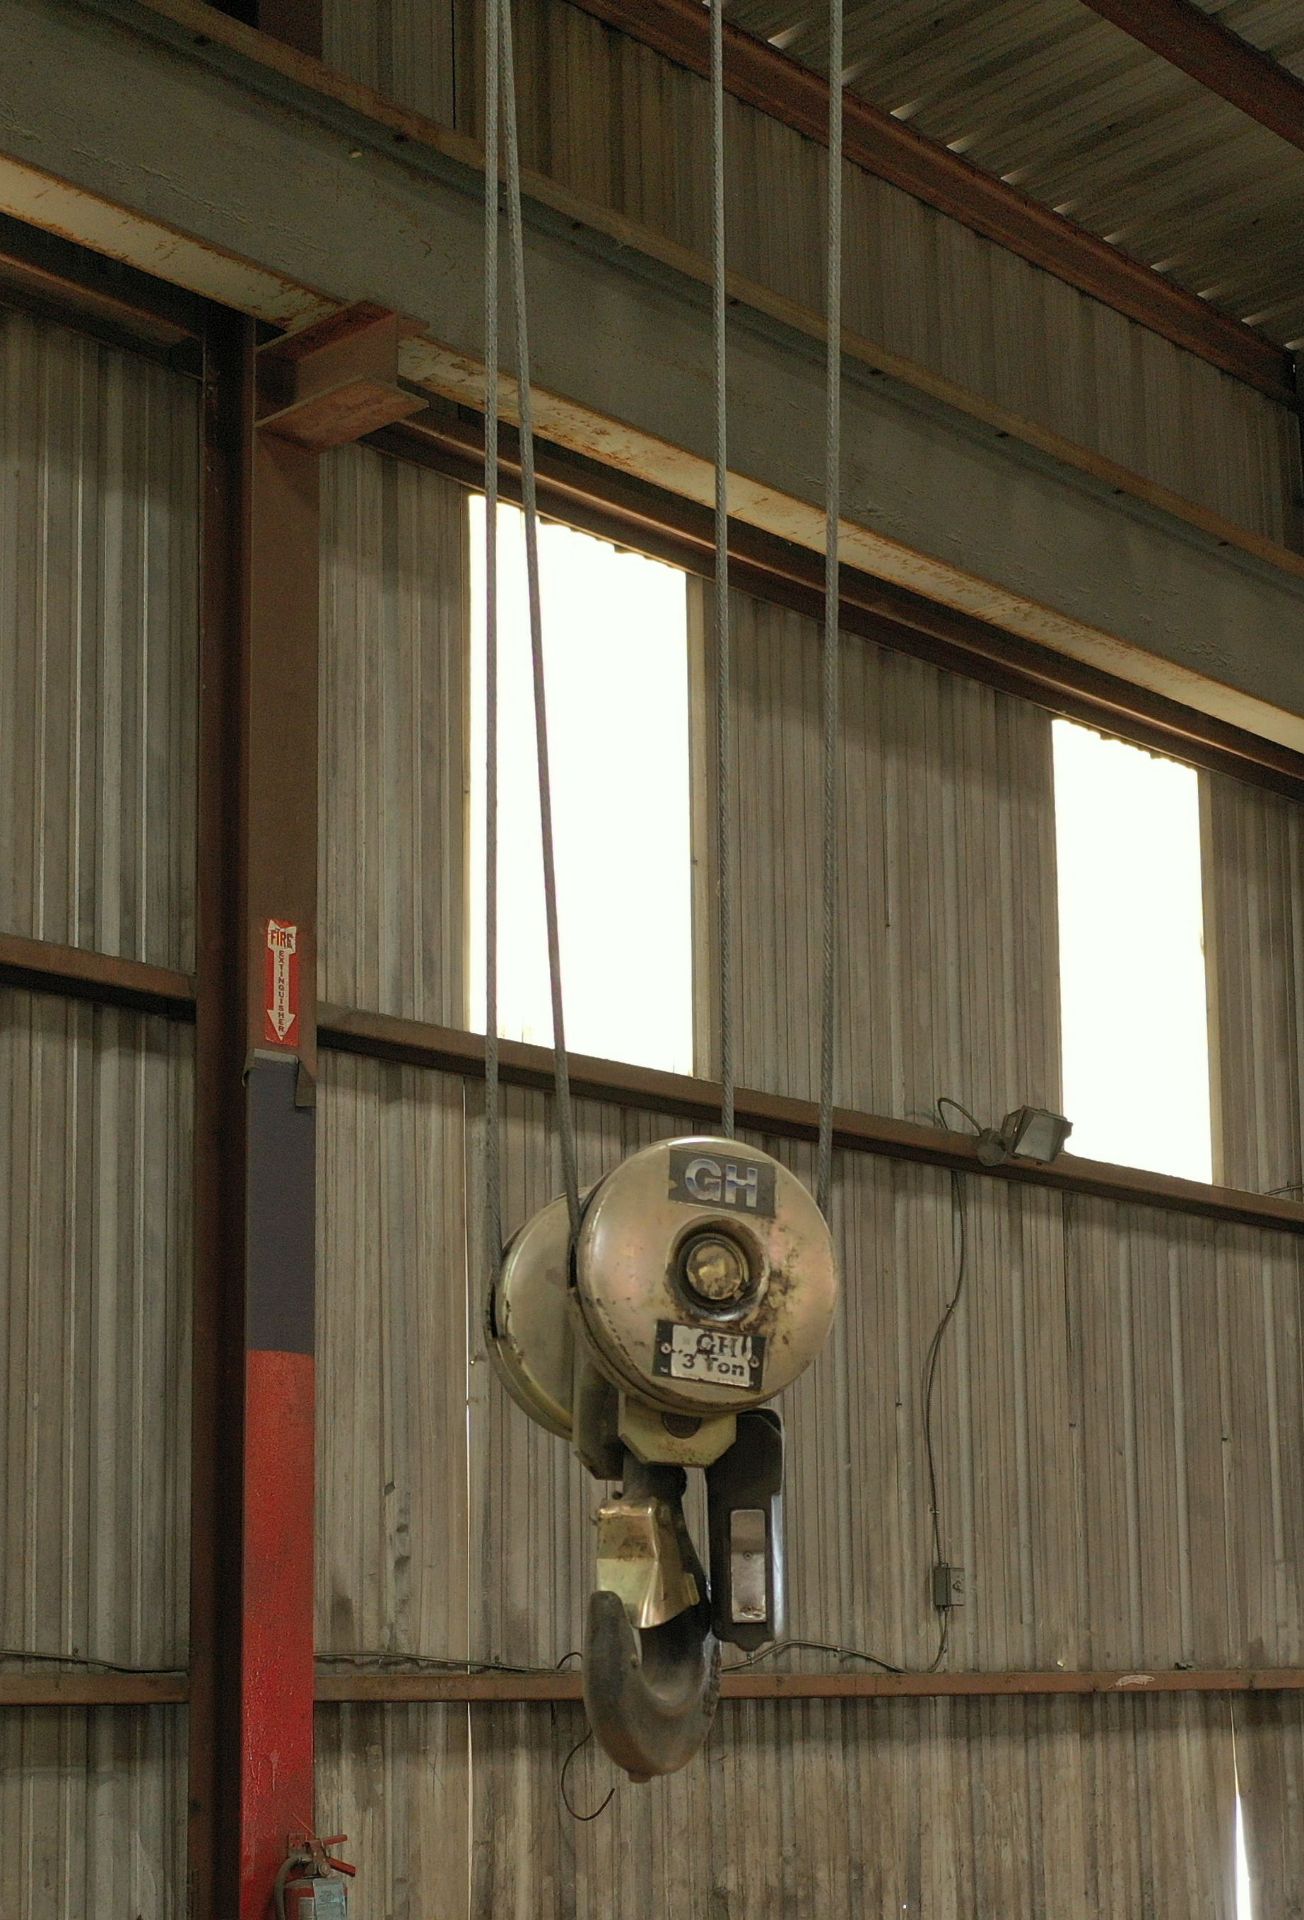 Stewart Wattley 3 Ton Overhead Crane SN: 89-0408A with 3 Ton Hoist & Pendant Control, Approx 42 ft - Image 3 of 3